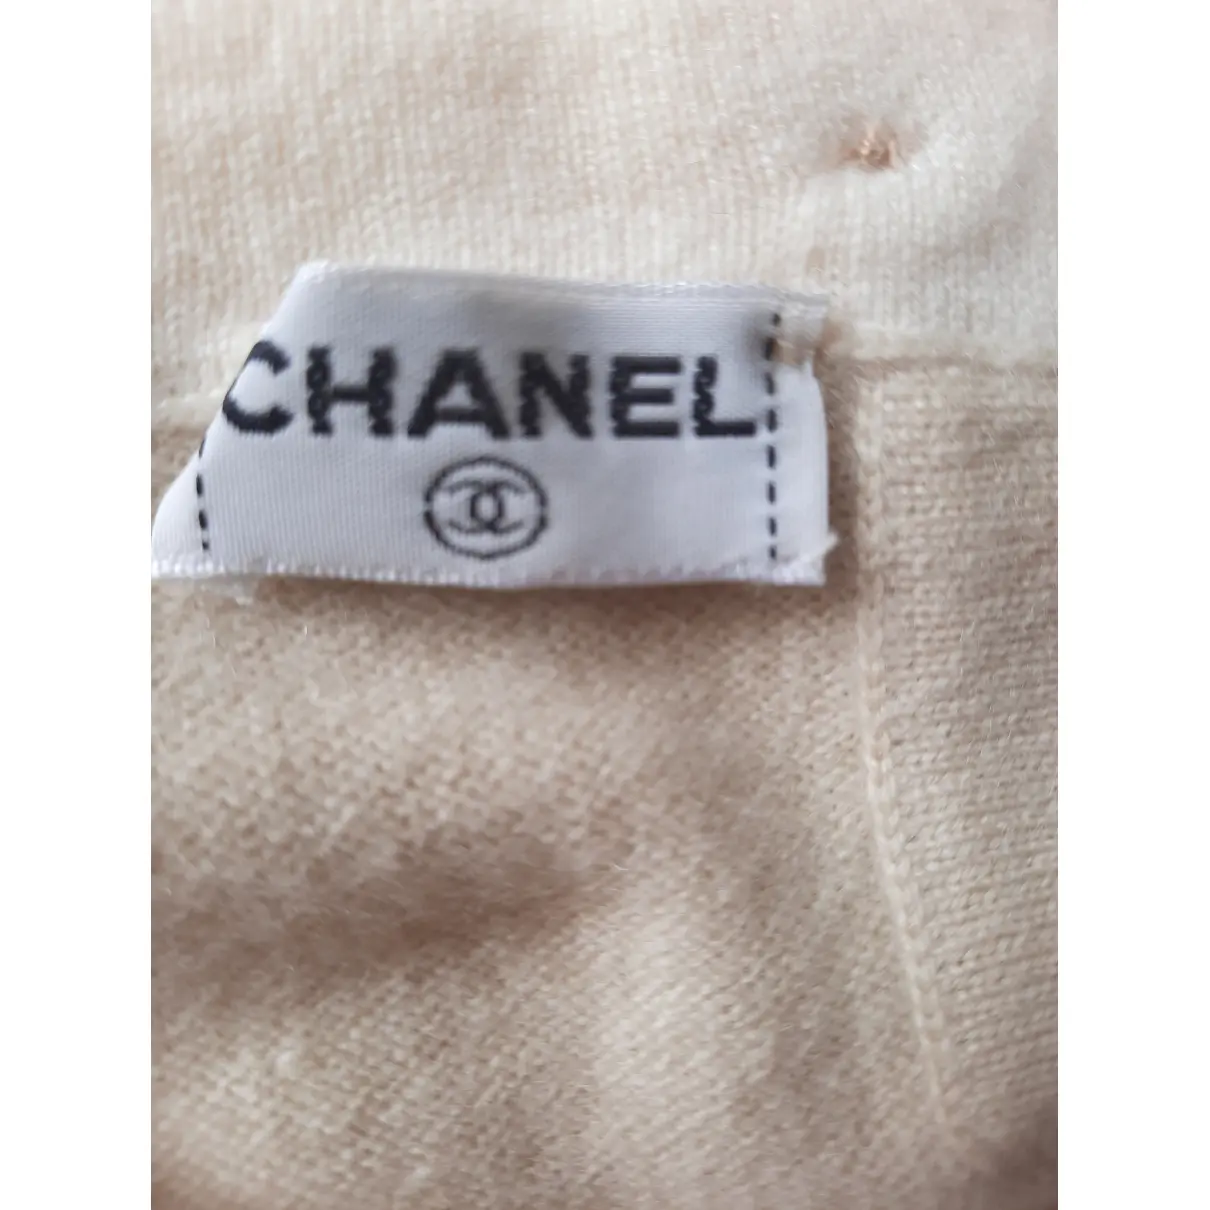 Buy Chanel Cashmere jersey top online